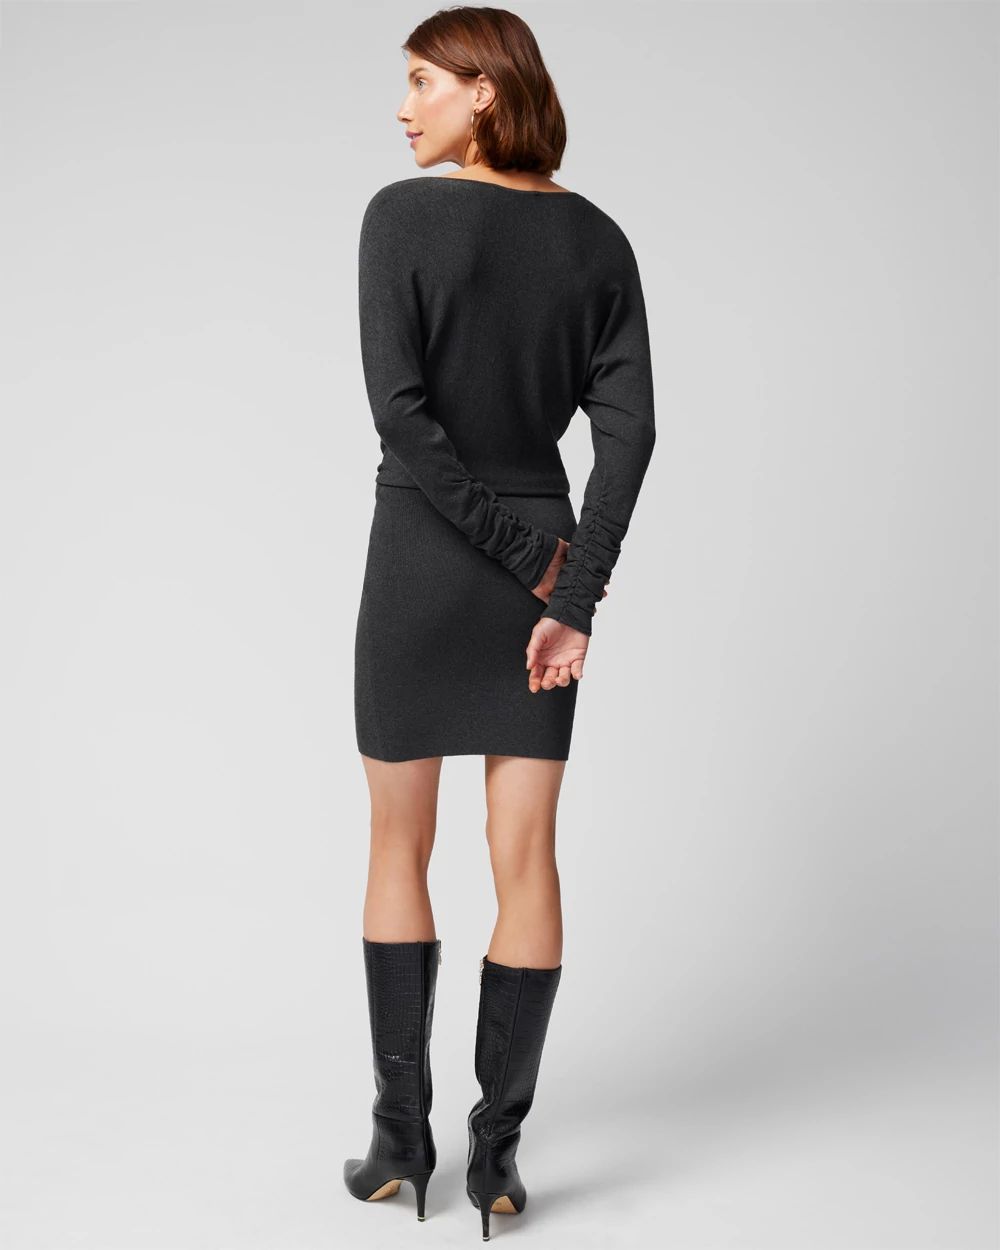 Long Sleeve Dolman Sweater Dress click to view larger image.